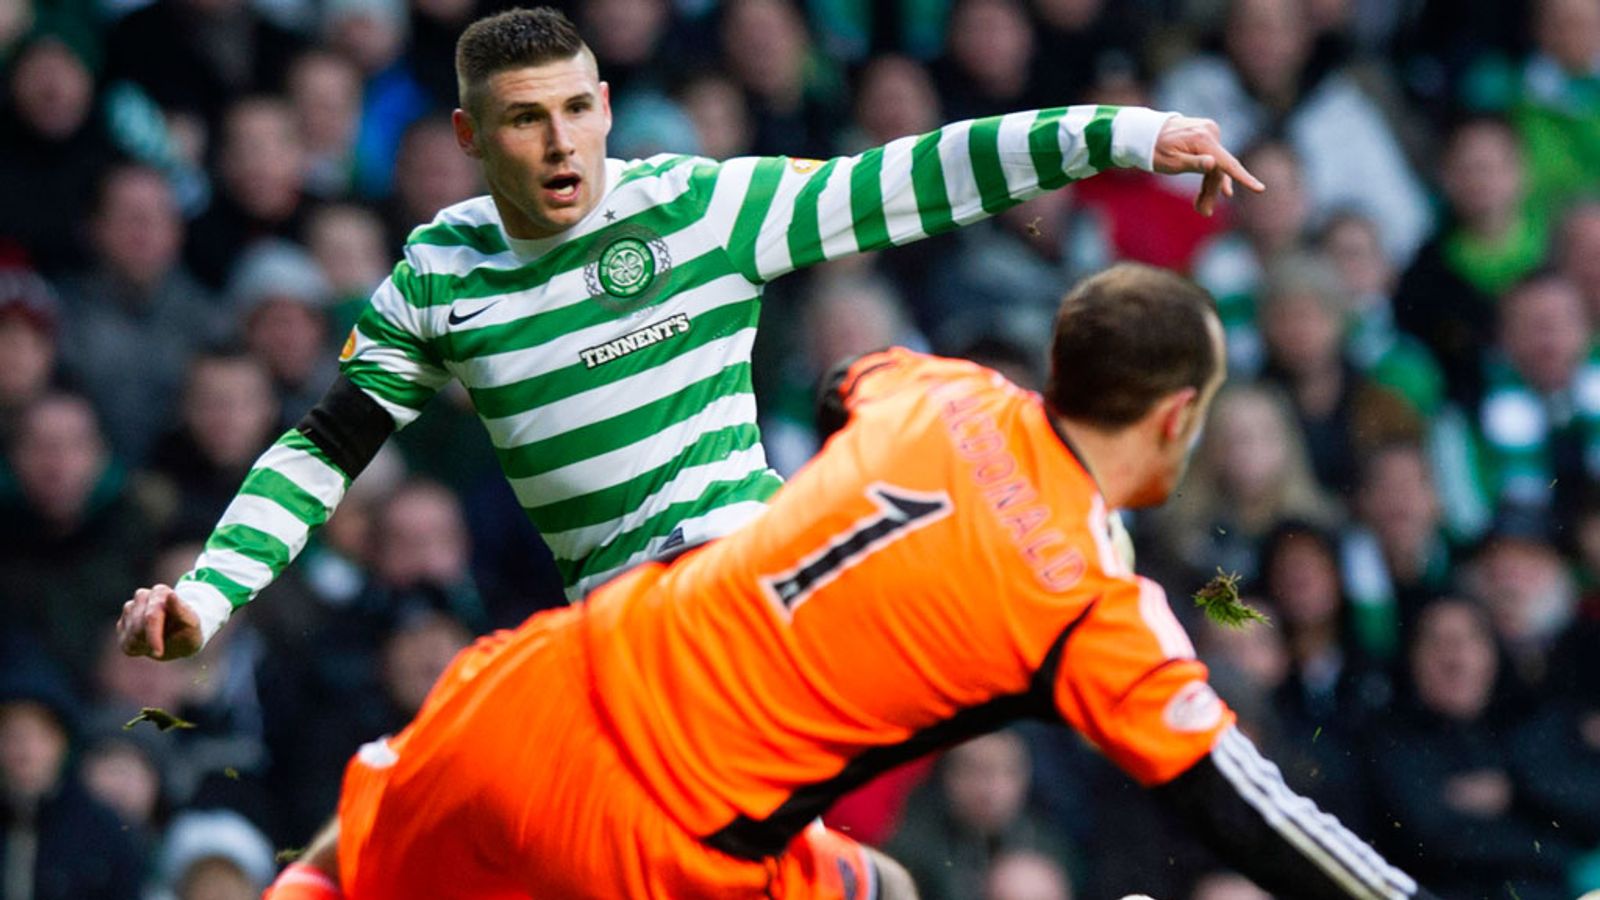 Celtic 4 - 1 Hearts - Match Report & Highlights1600 x 900